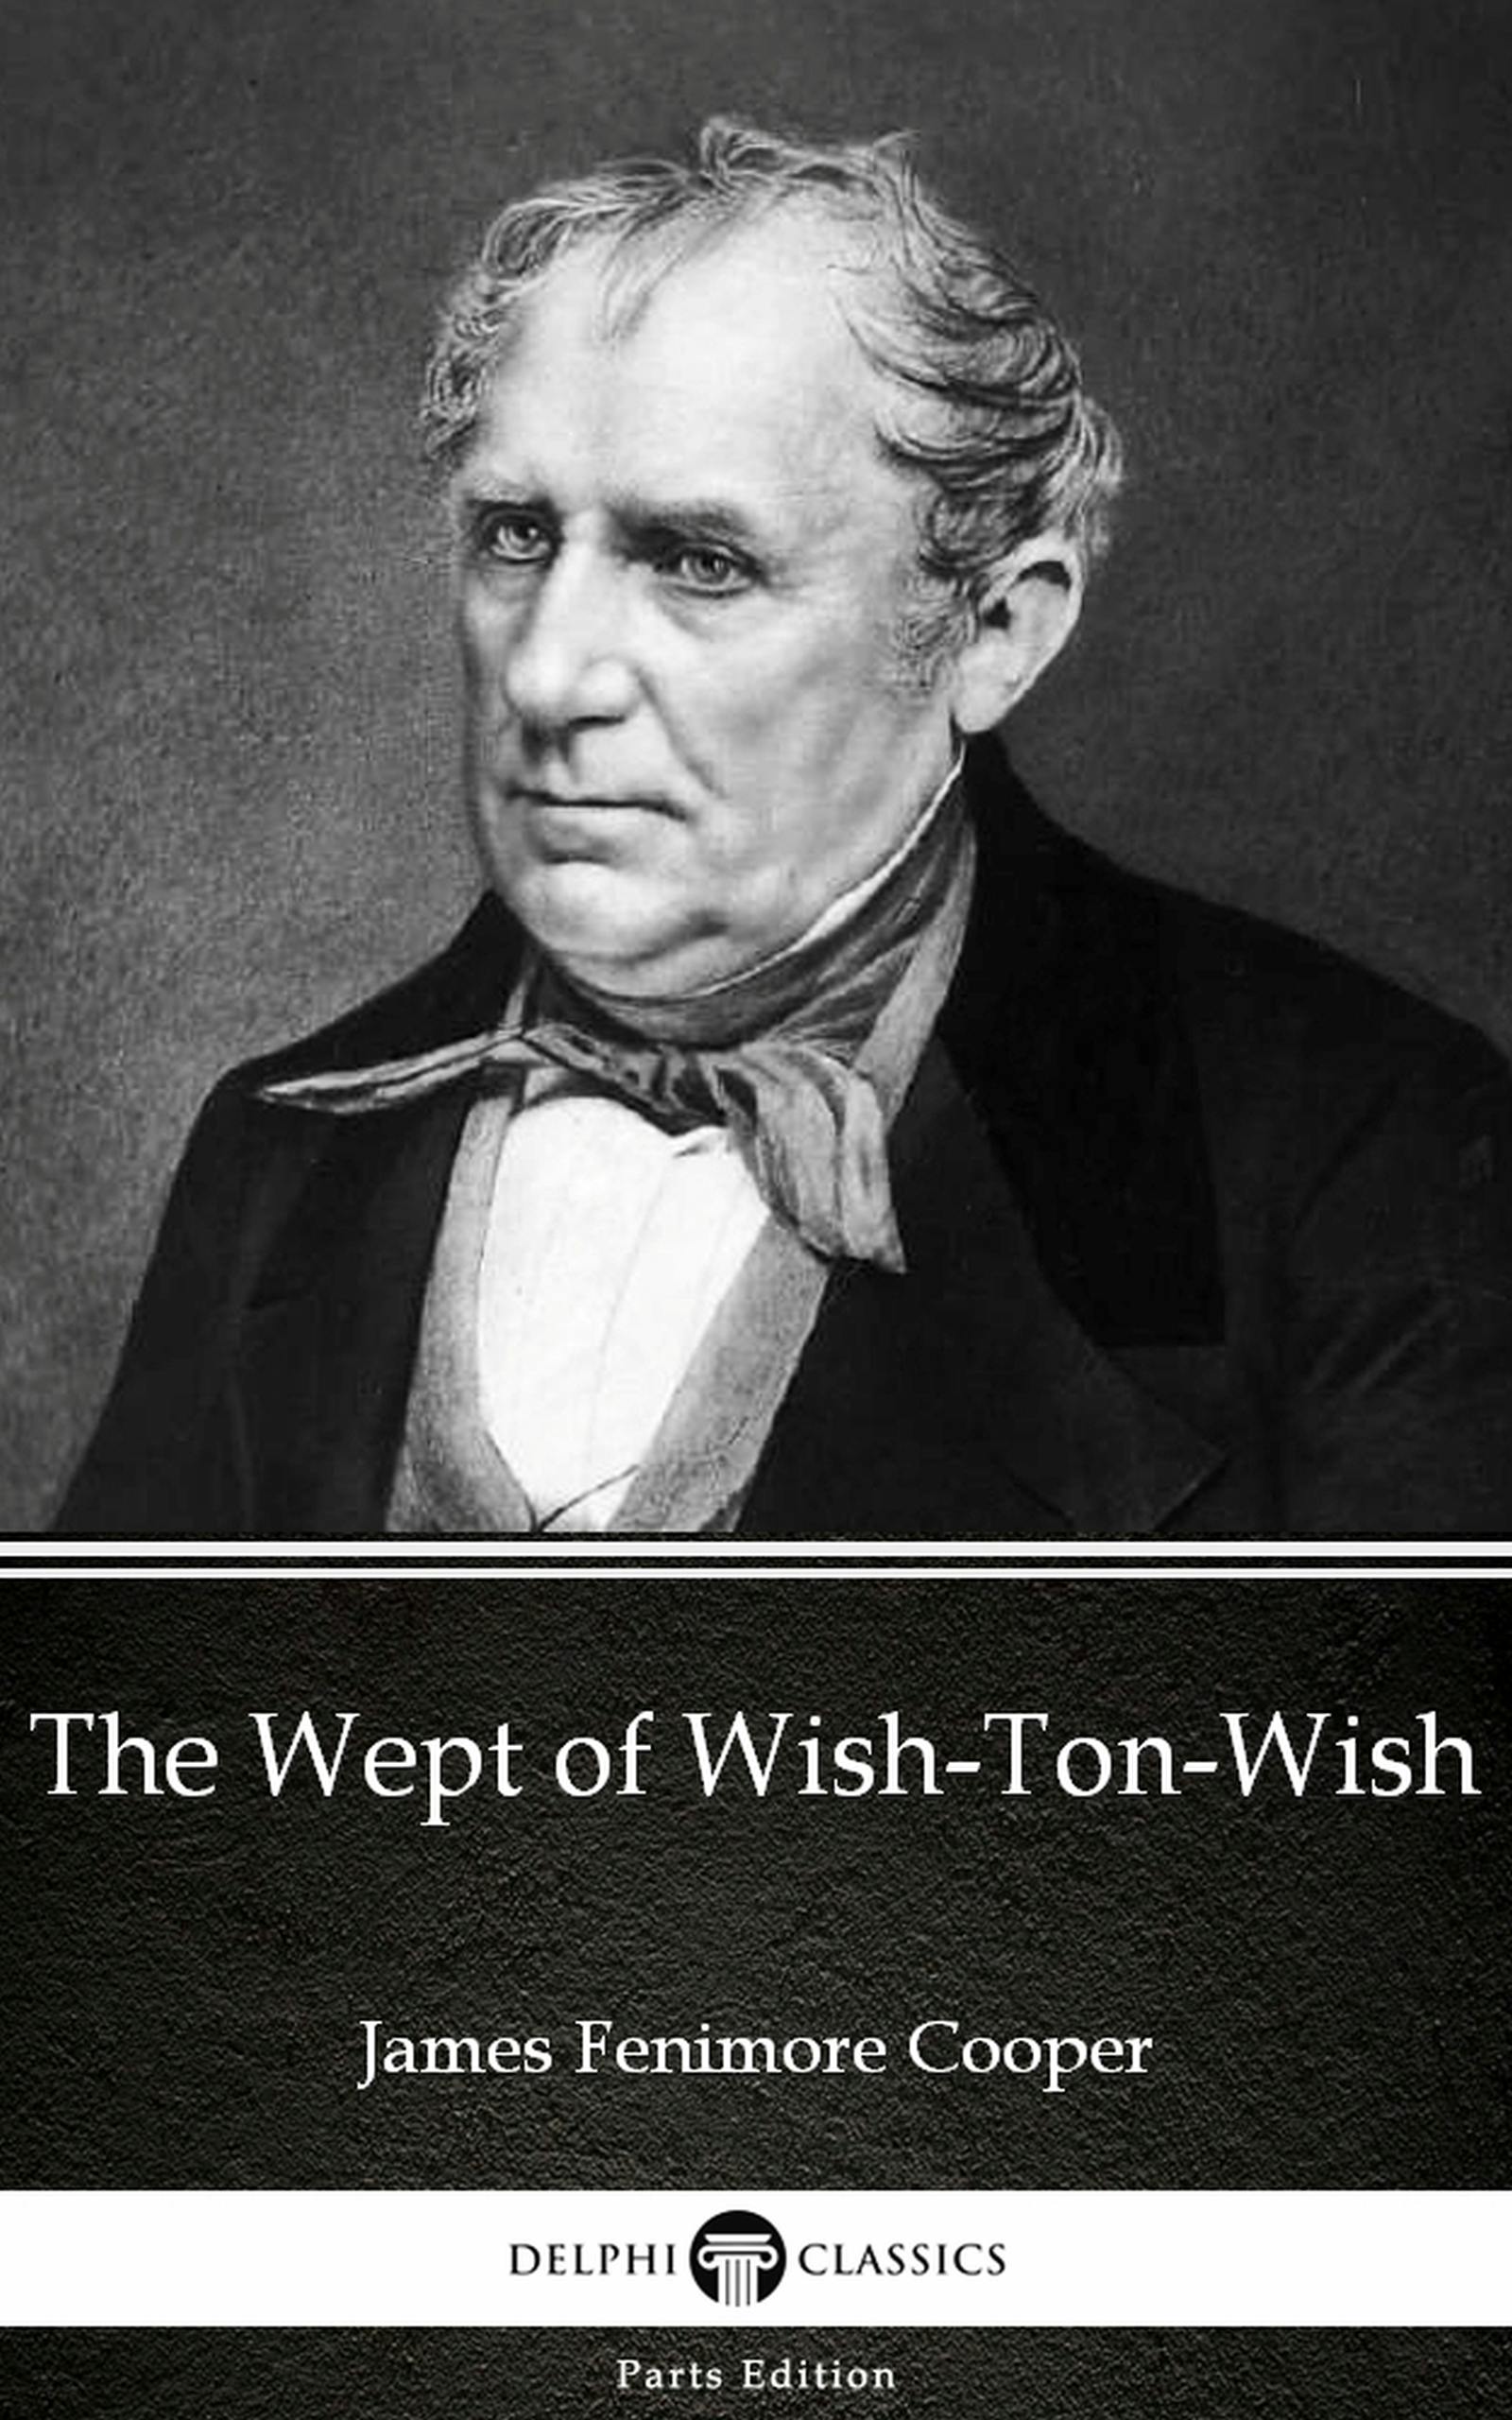 The Wept of Wish-Ton-Wish by James Fenimore Cooper - Delphi Classics (Illustrated) - James Fenimore Cooper